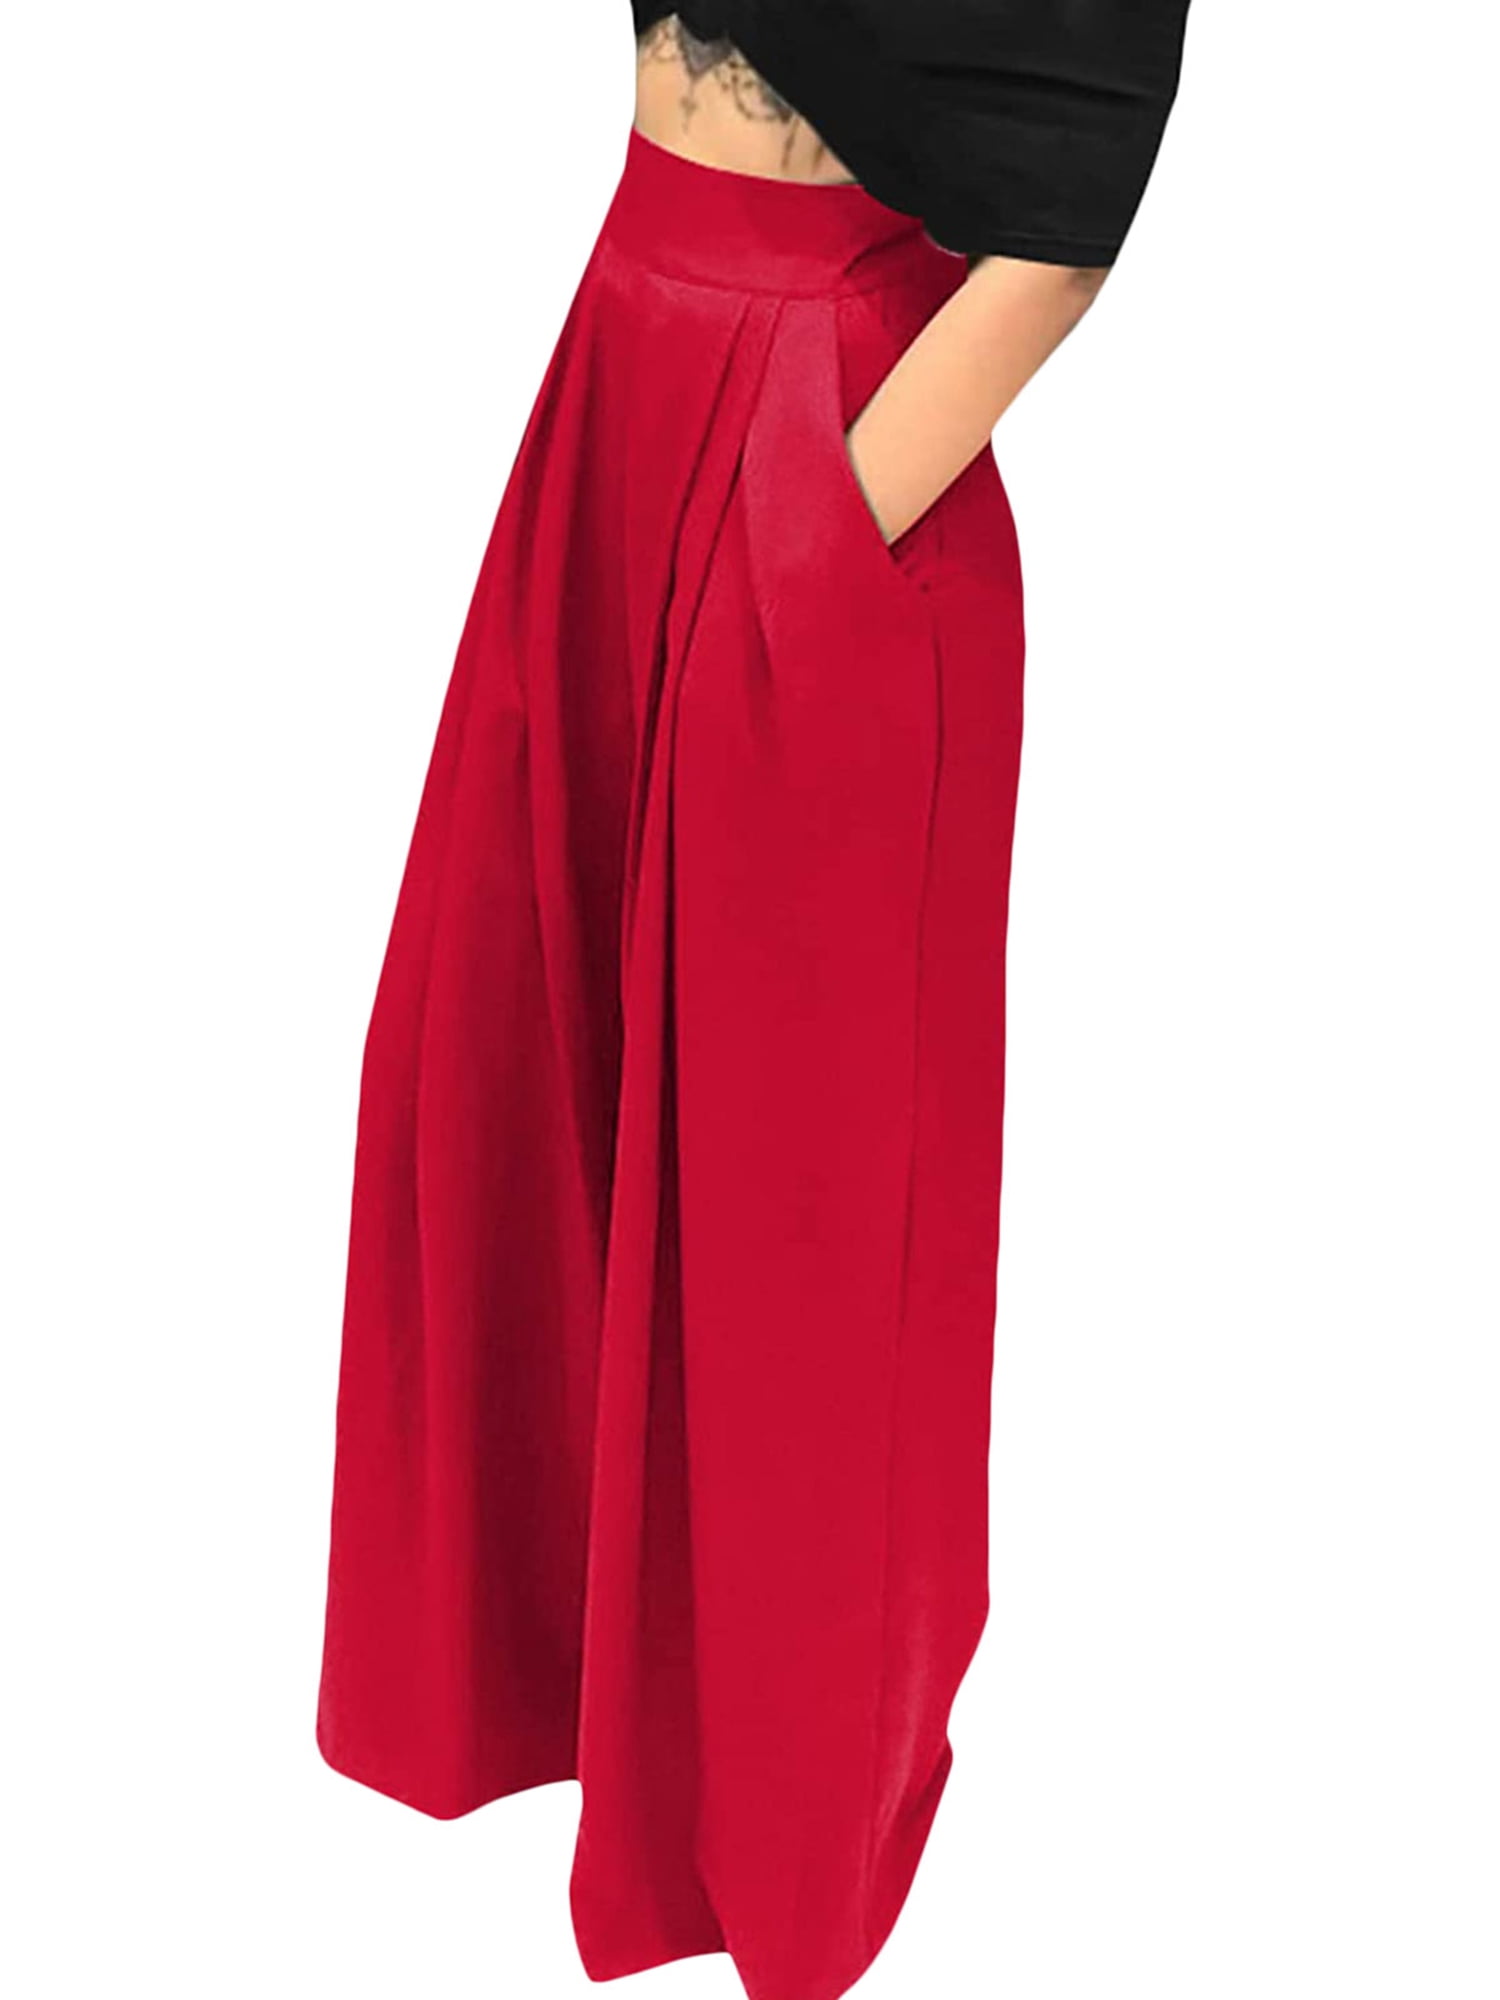 UHUYA Womens Casual Pants Trendy Versatile Fashion Summer Casual Loose  Pocket Solid Trousers Wide Leg Pants Red XL US:10